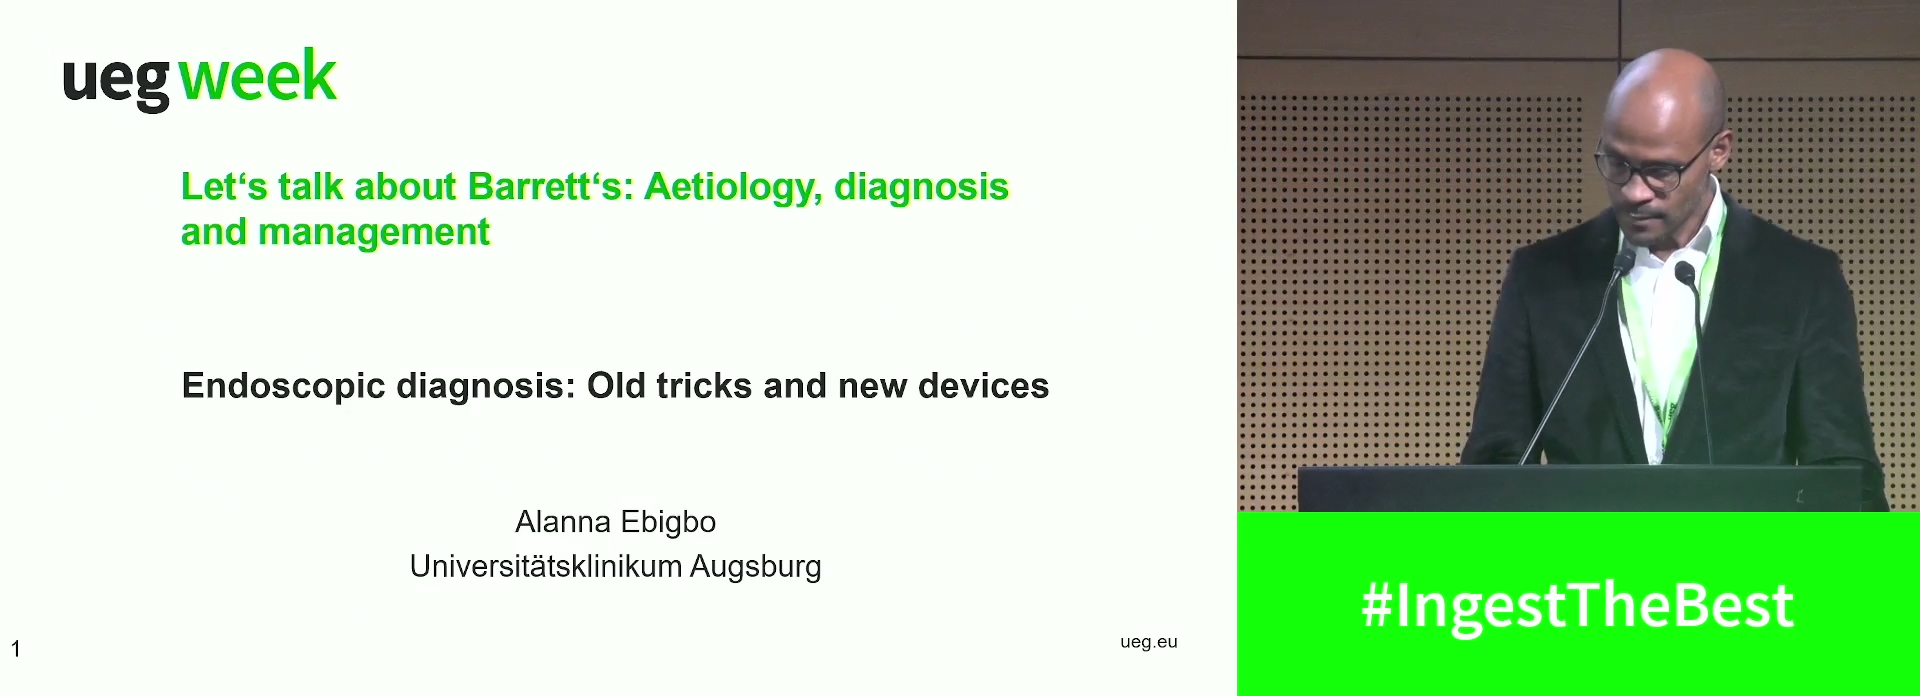 Endoscopic diagnosis: Old tricks and new devices